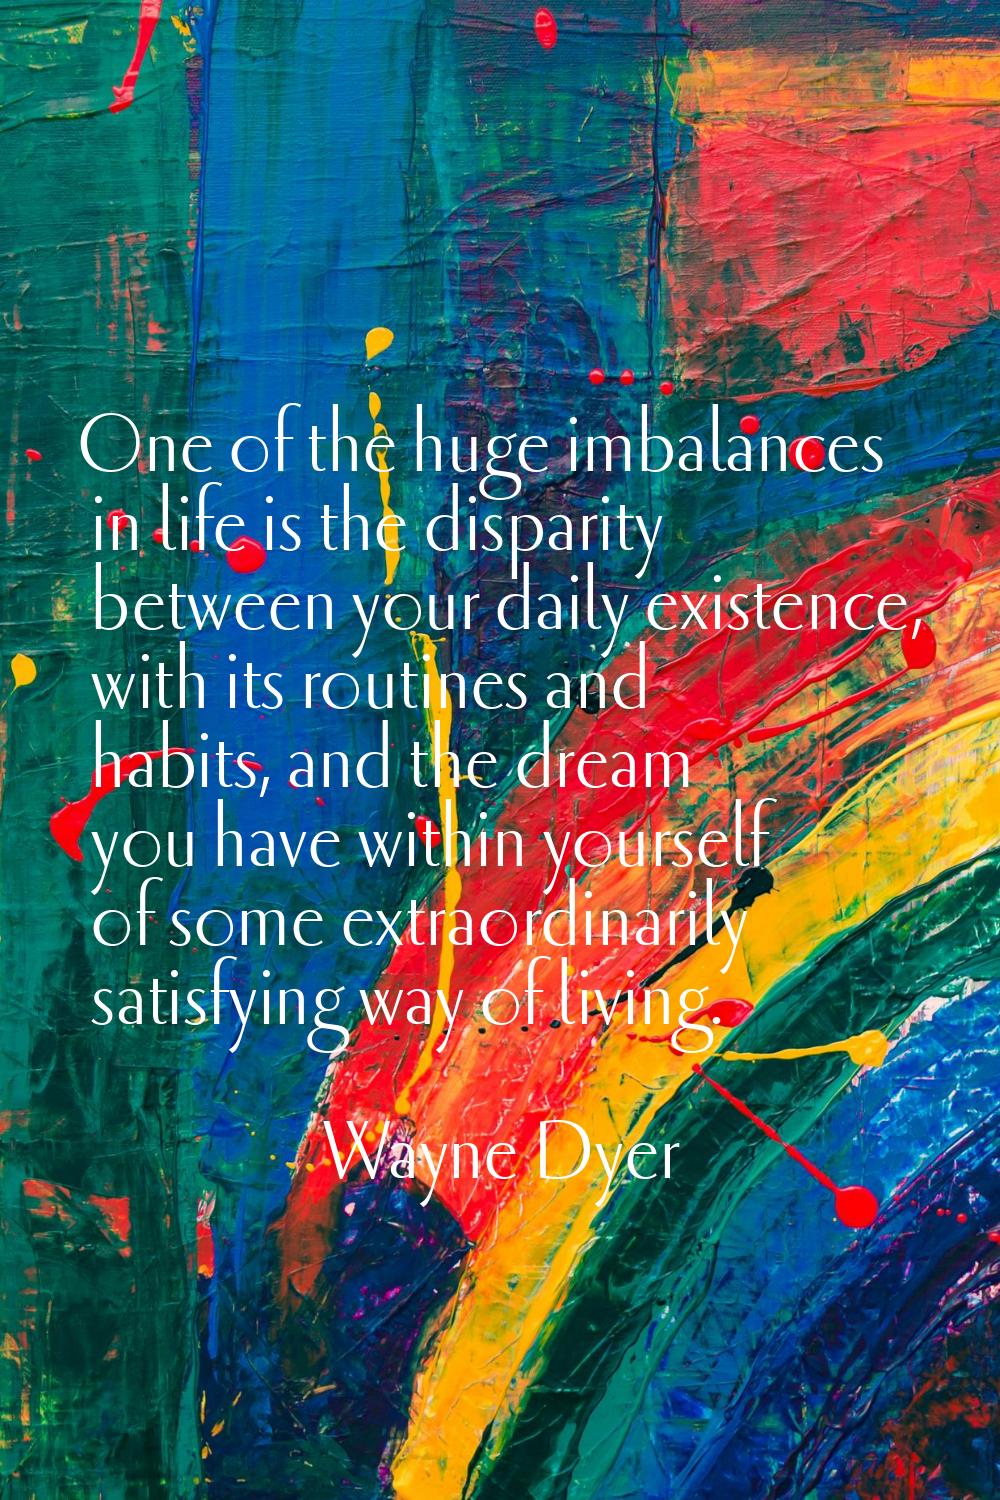 One of the huge imbalances in life is the disparity between your daily existence, with its routines